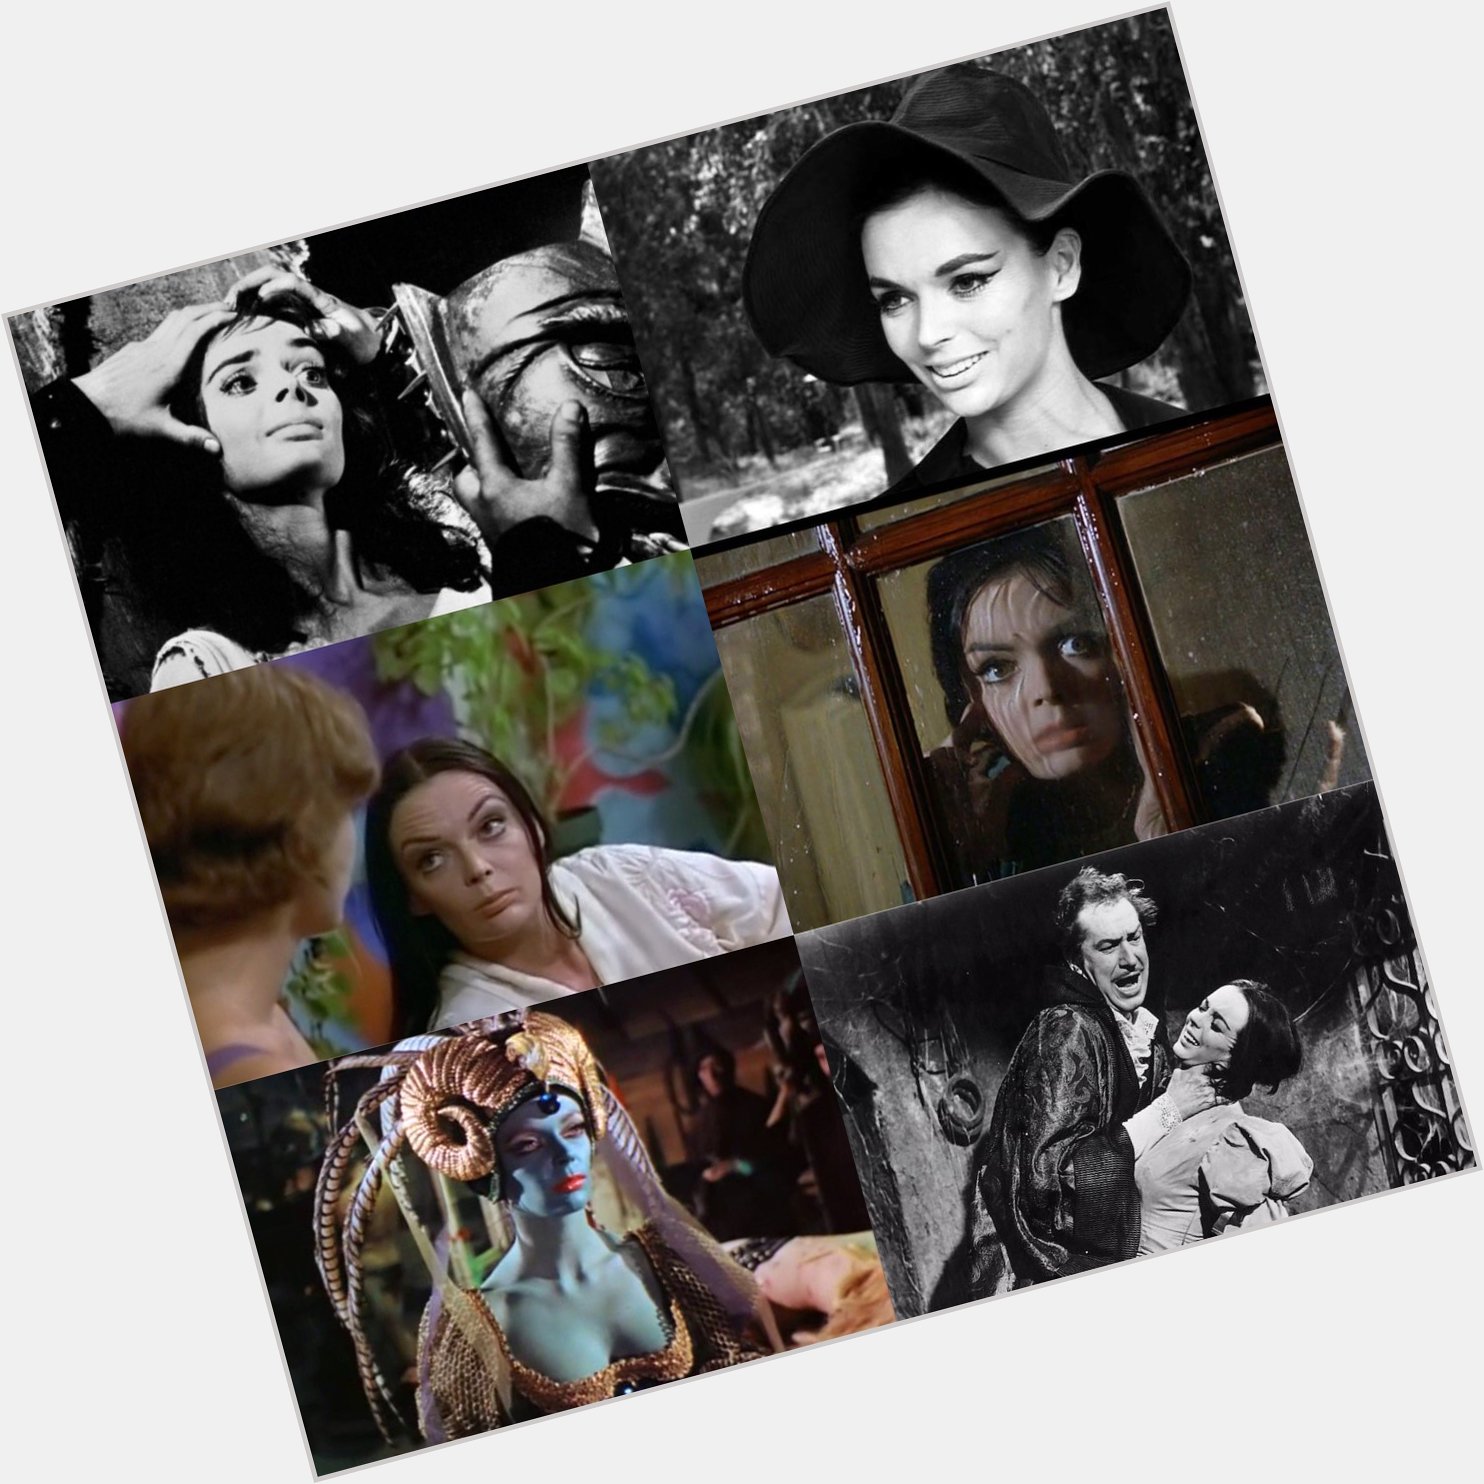 A very Happy belated Birthday to the magnificent Barbara Steele who turned 80 years young yesterday. 